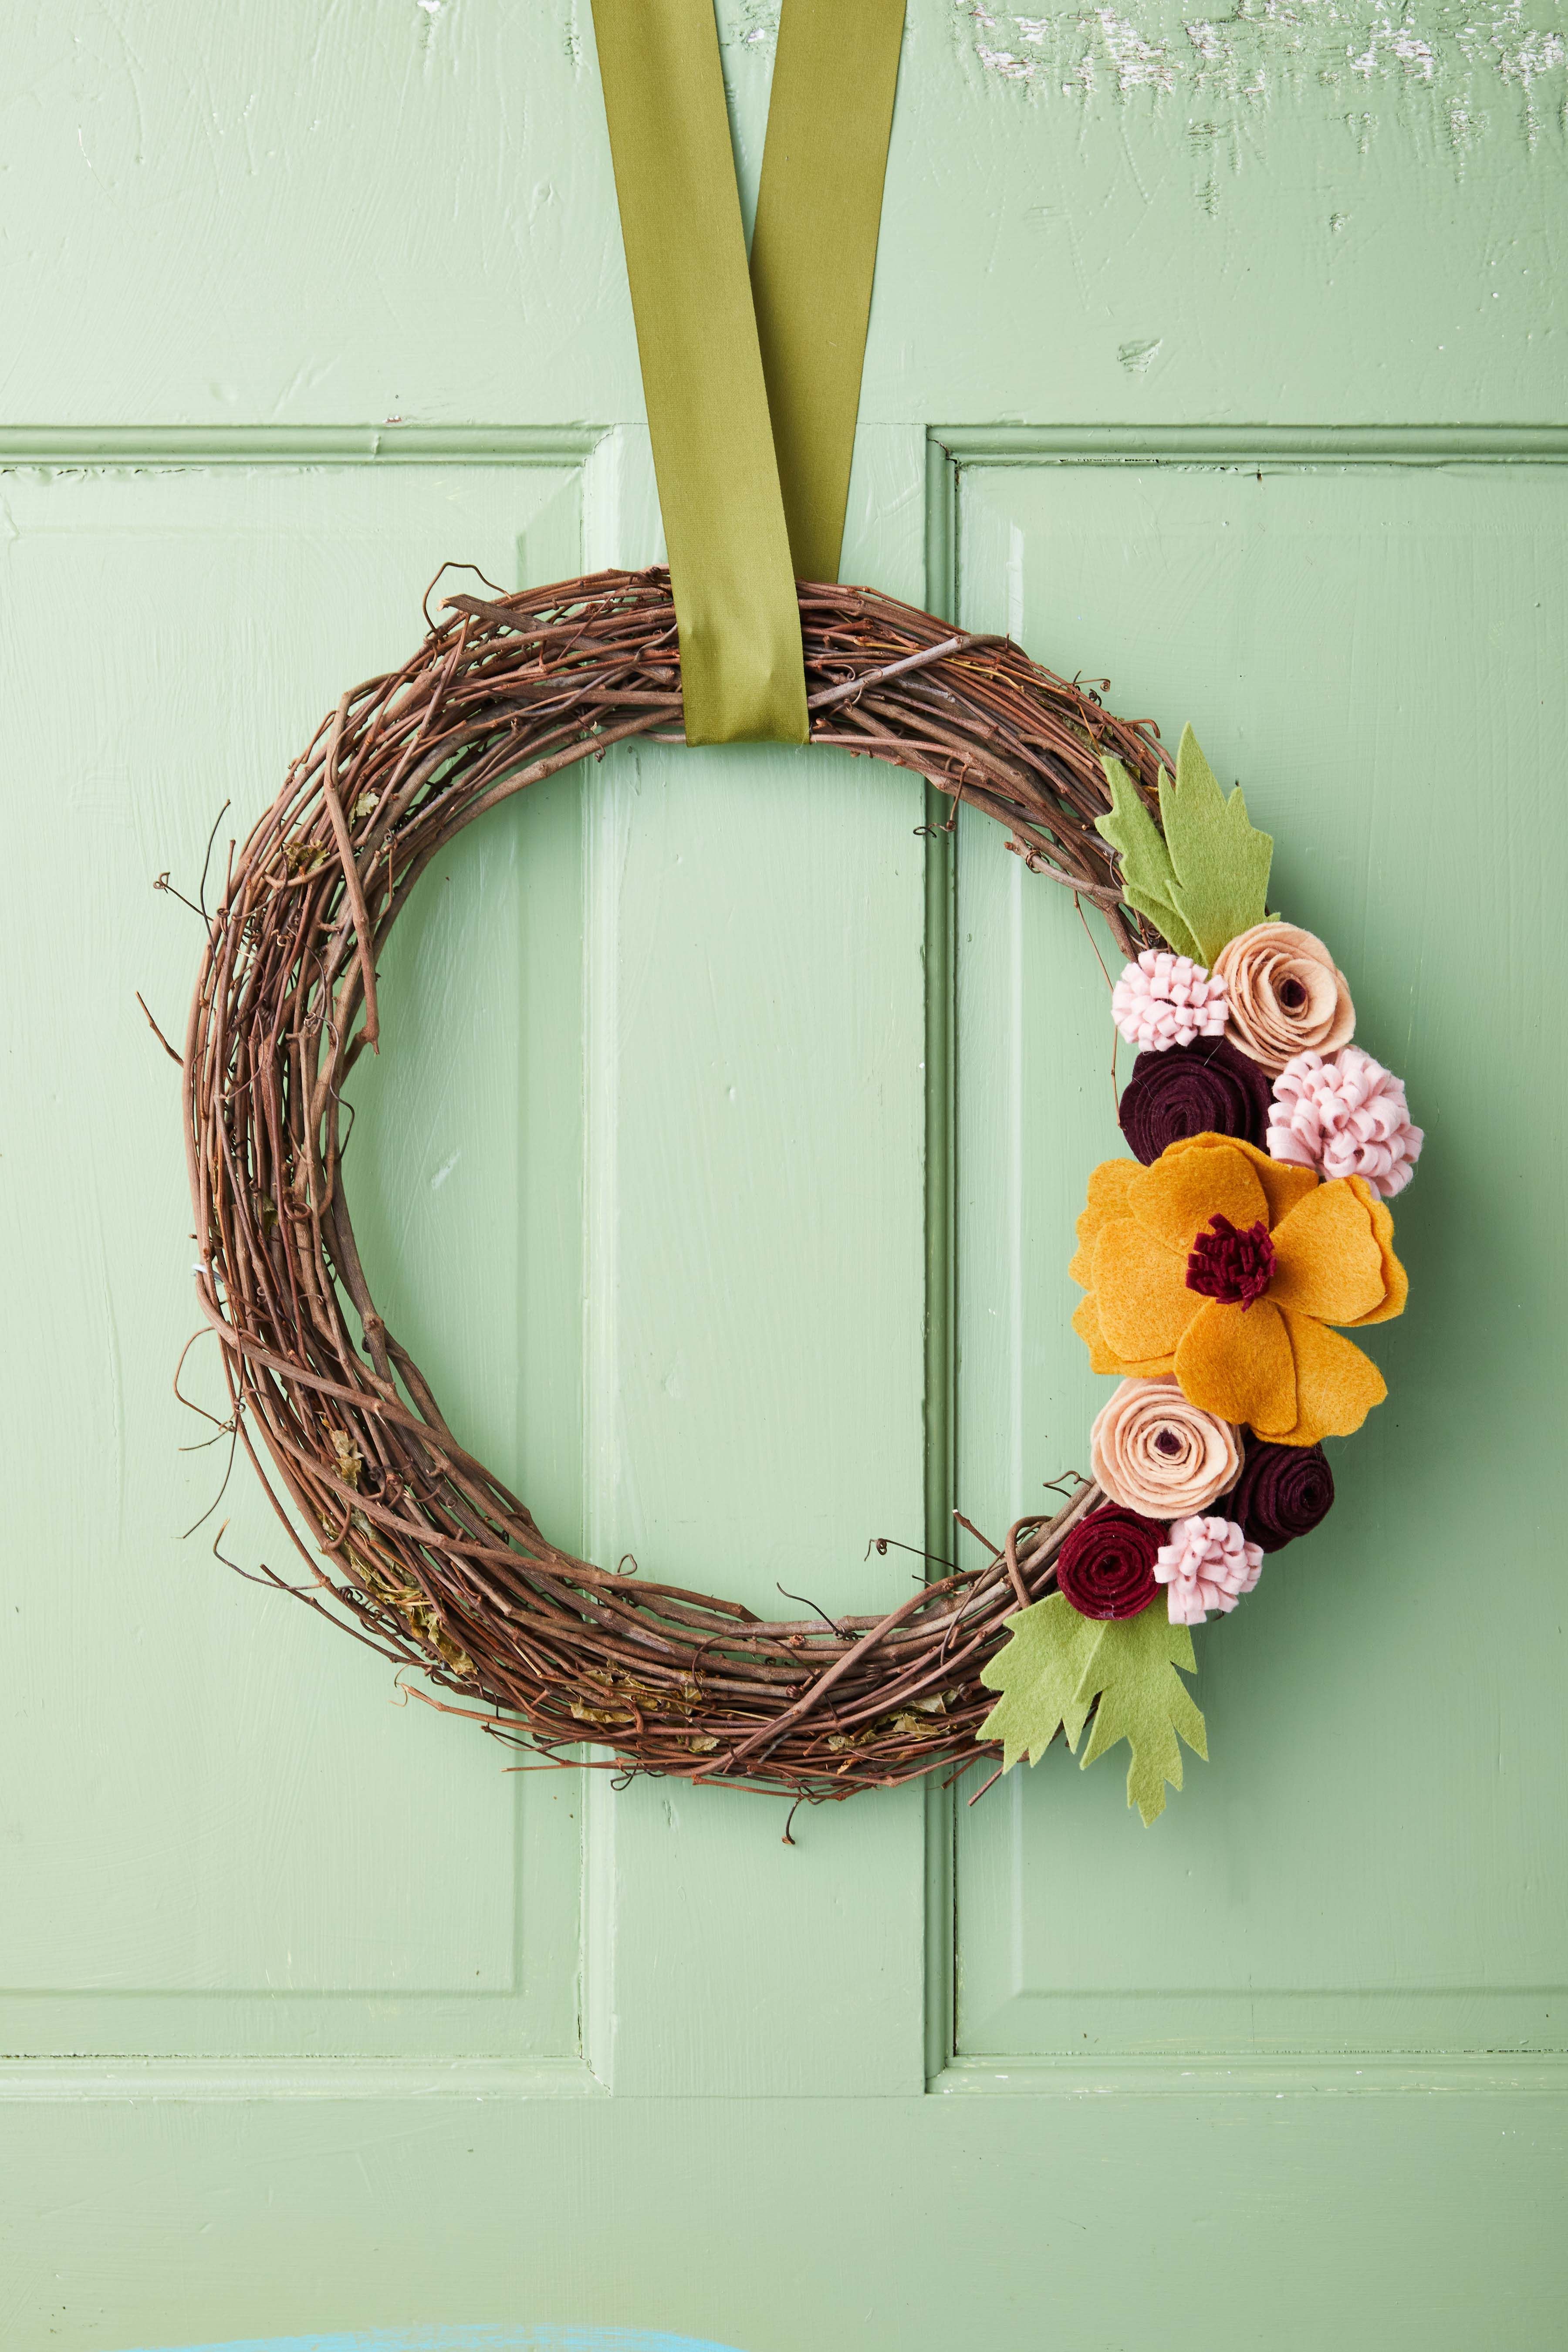 21 Amazingly #Falltastic Thanksgiving Crafts For Adults, DIY Projects